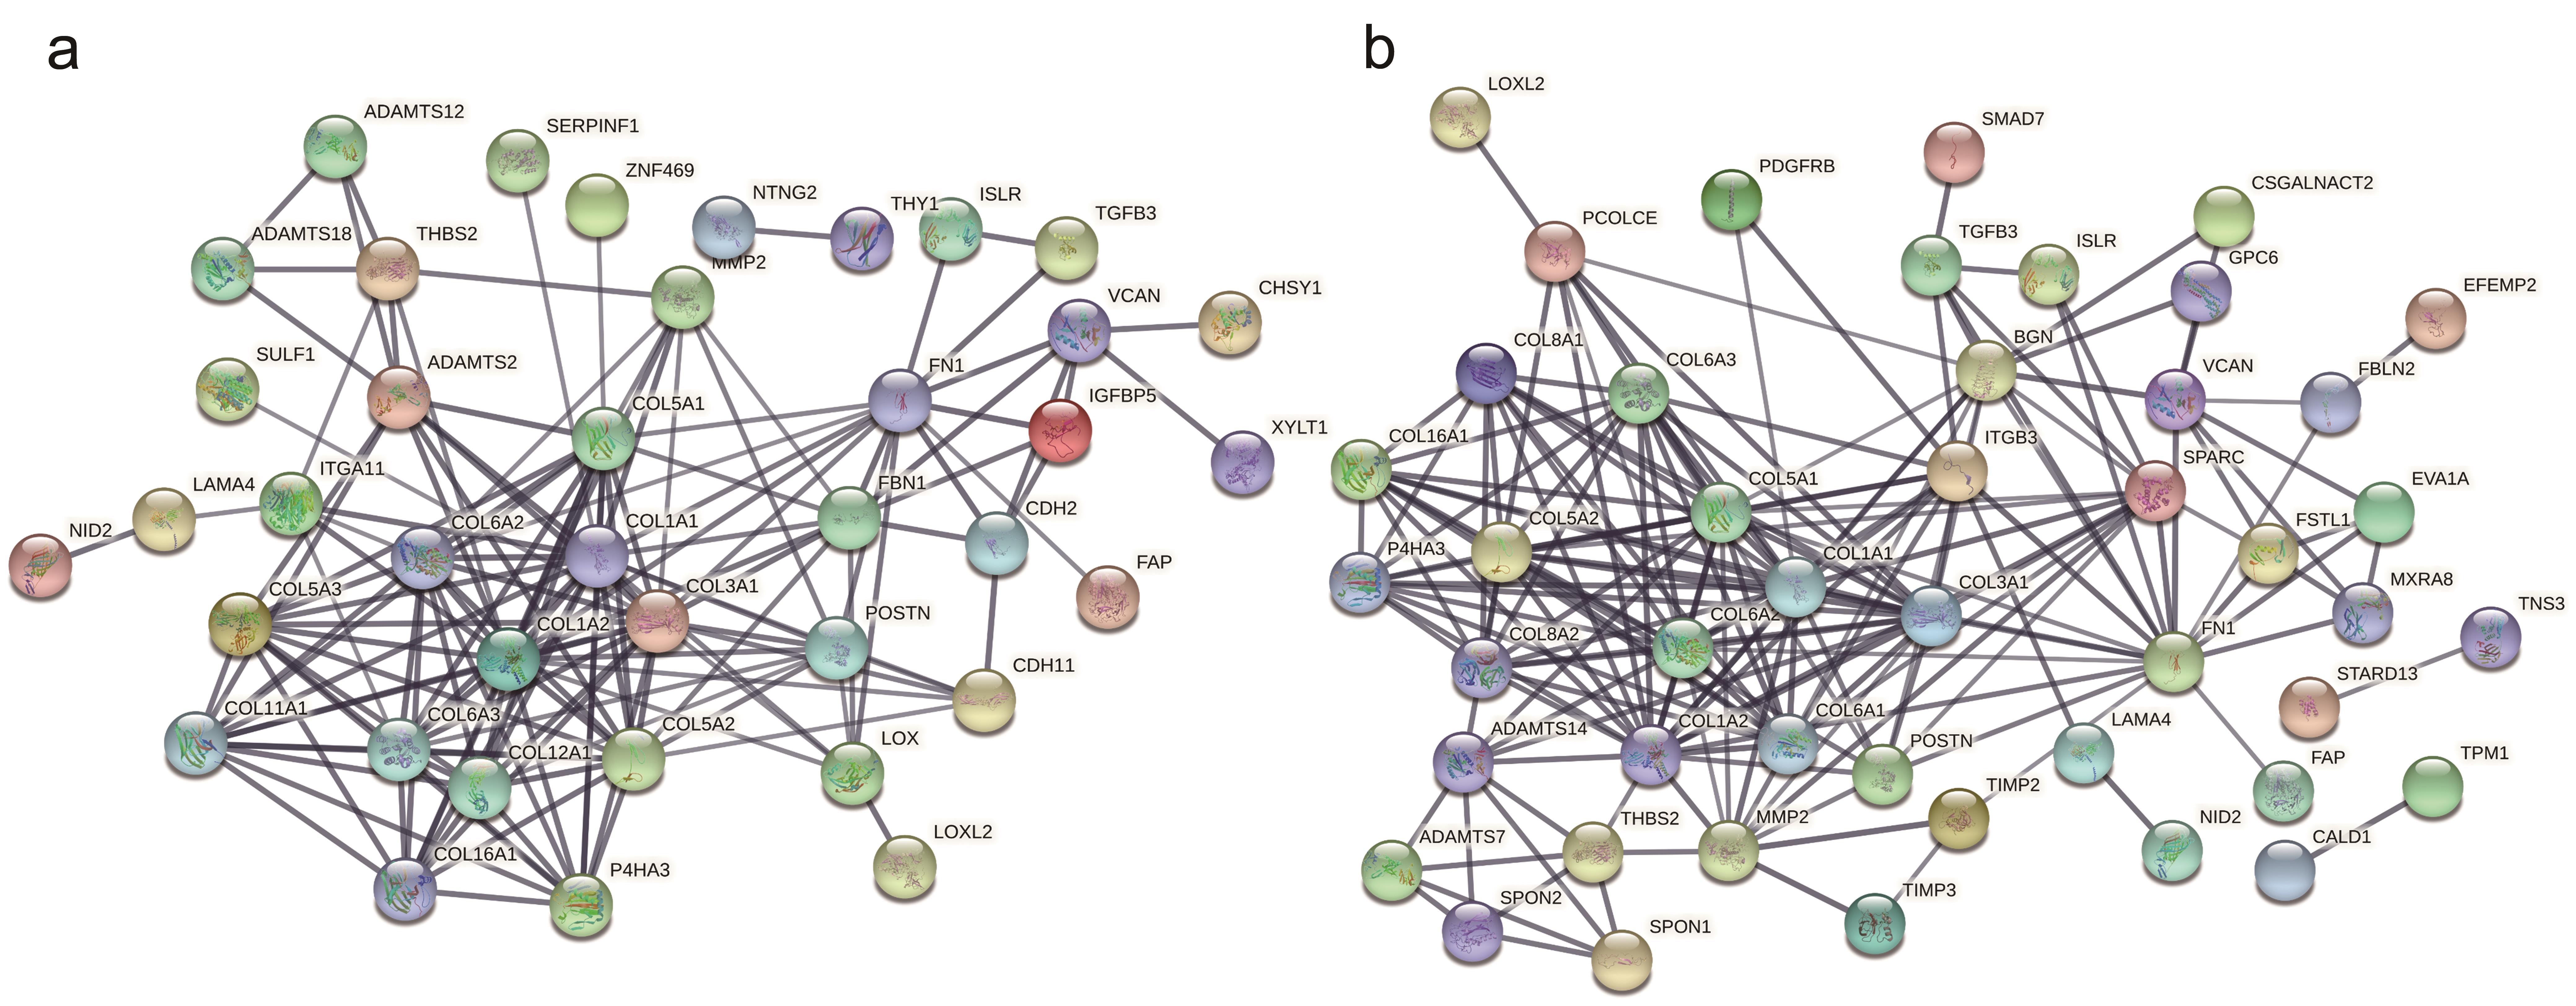 PPI network of the core targets in the pathogenesis of RUNX2 for LUAD (a) and LUSC (b).